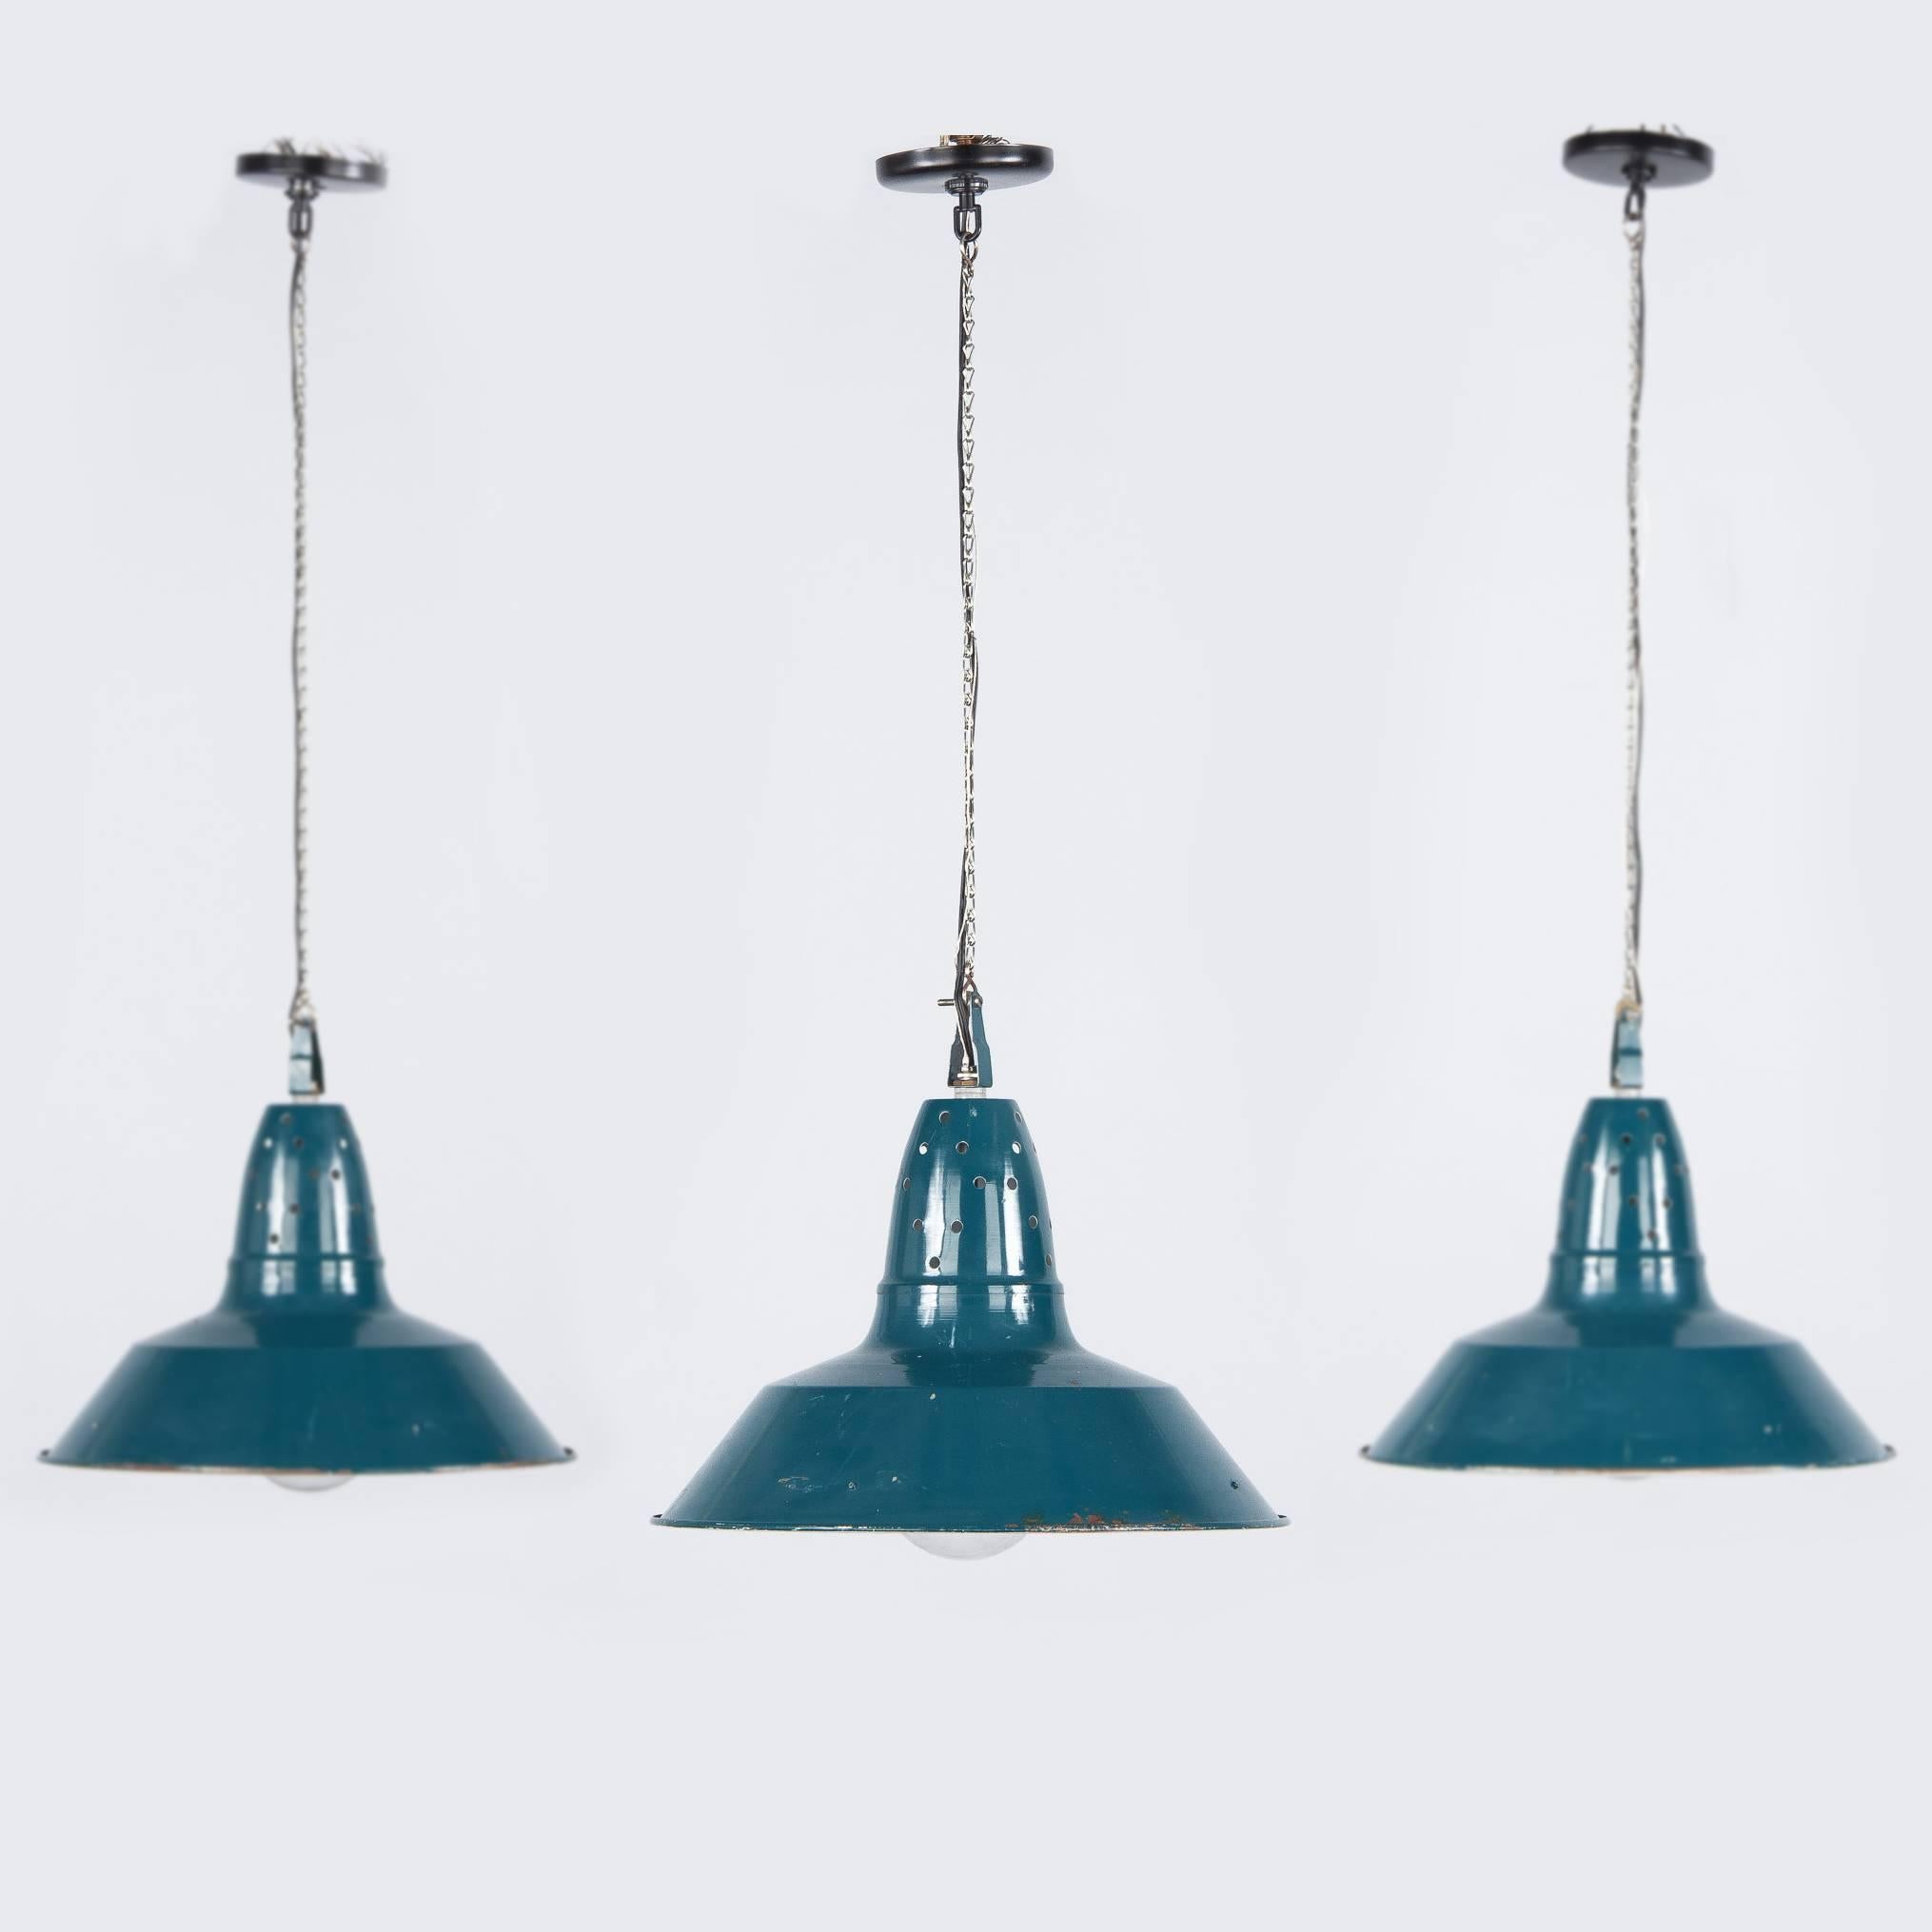 A set of three 1950s French Industrial Suspension Lights in blue/green metal. The chain and canopy add an additional 24